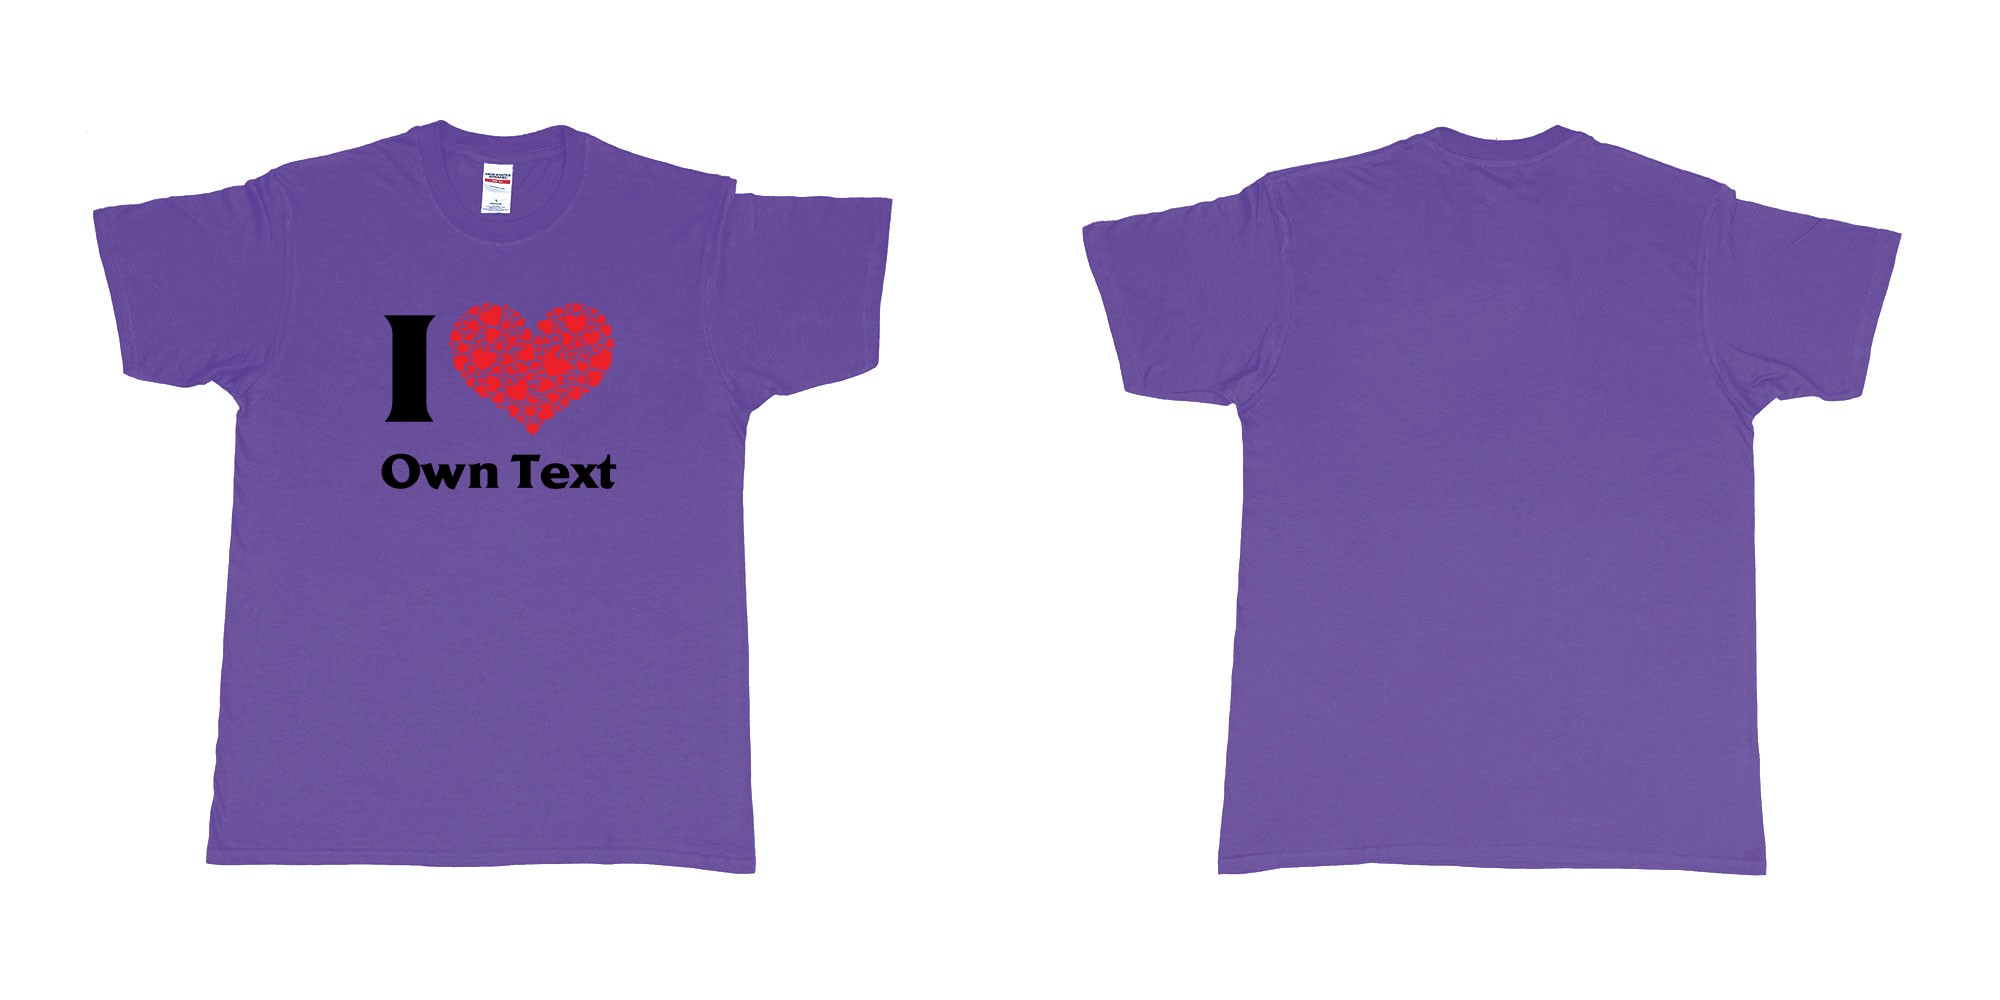 Custom tshirt design i loveheart custom own text bali tees mom dad beach kuta in fabric color purple choice your own text made in Bali by The Pirate Way